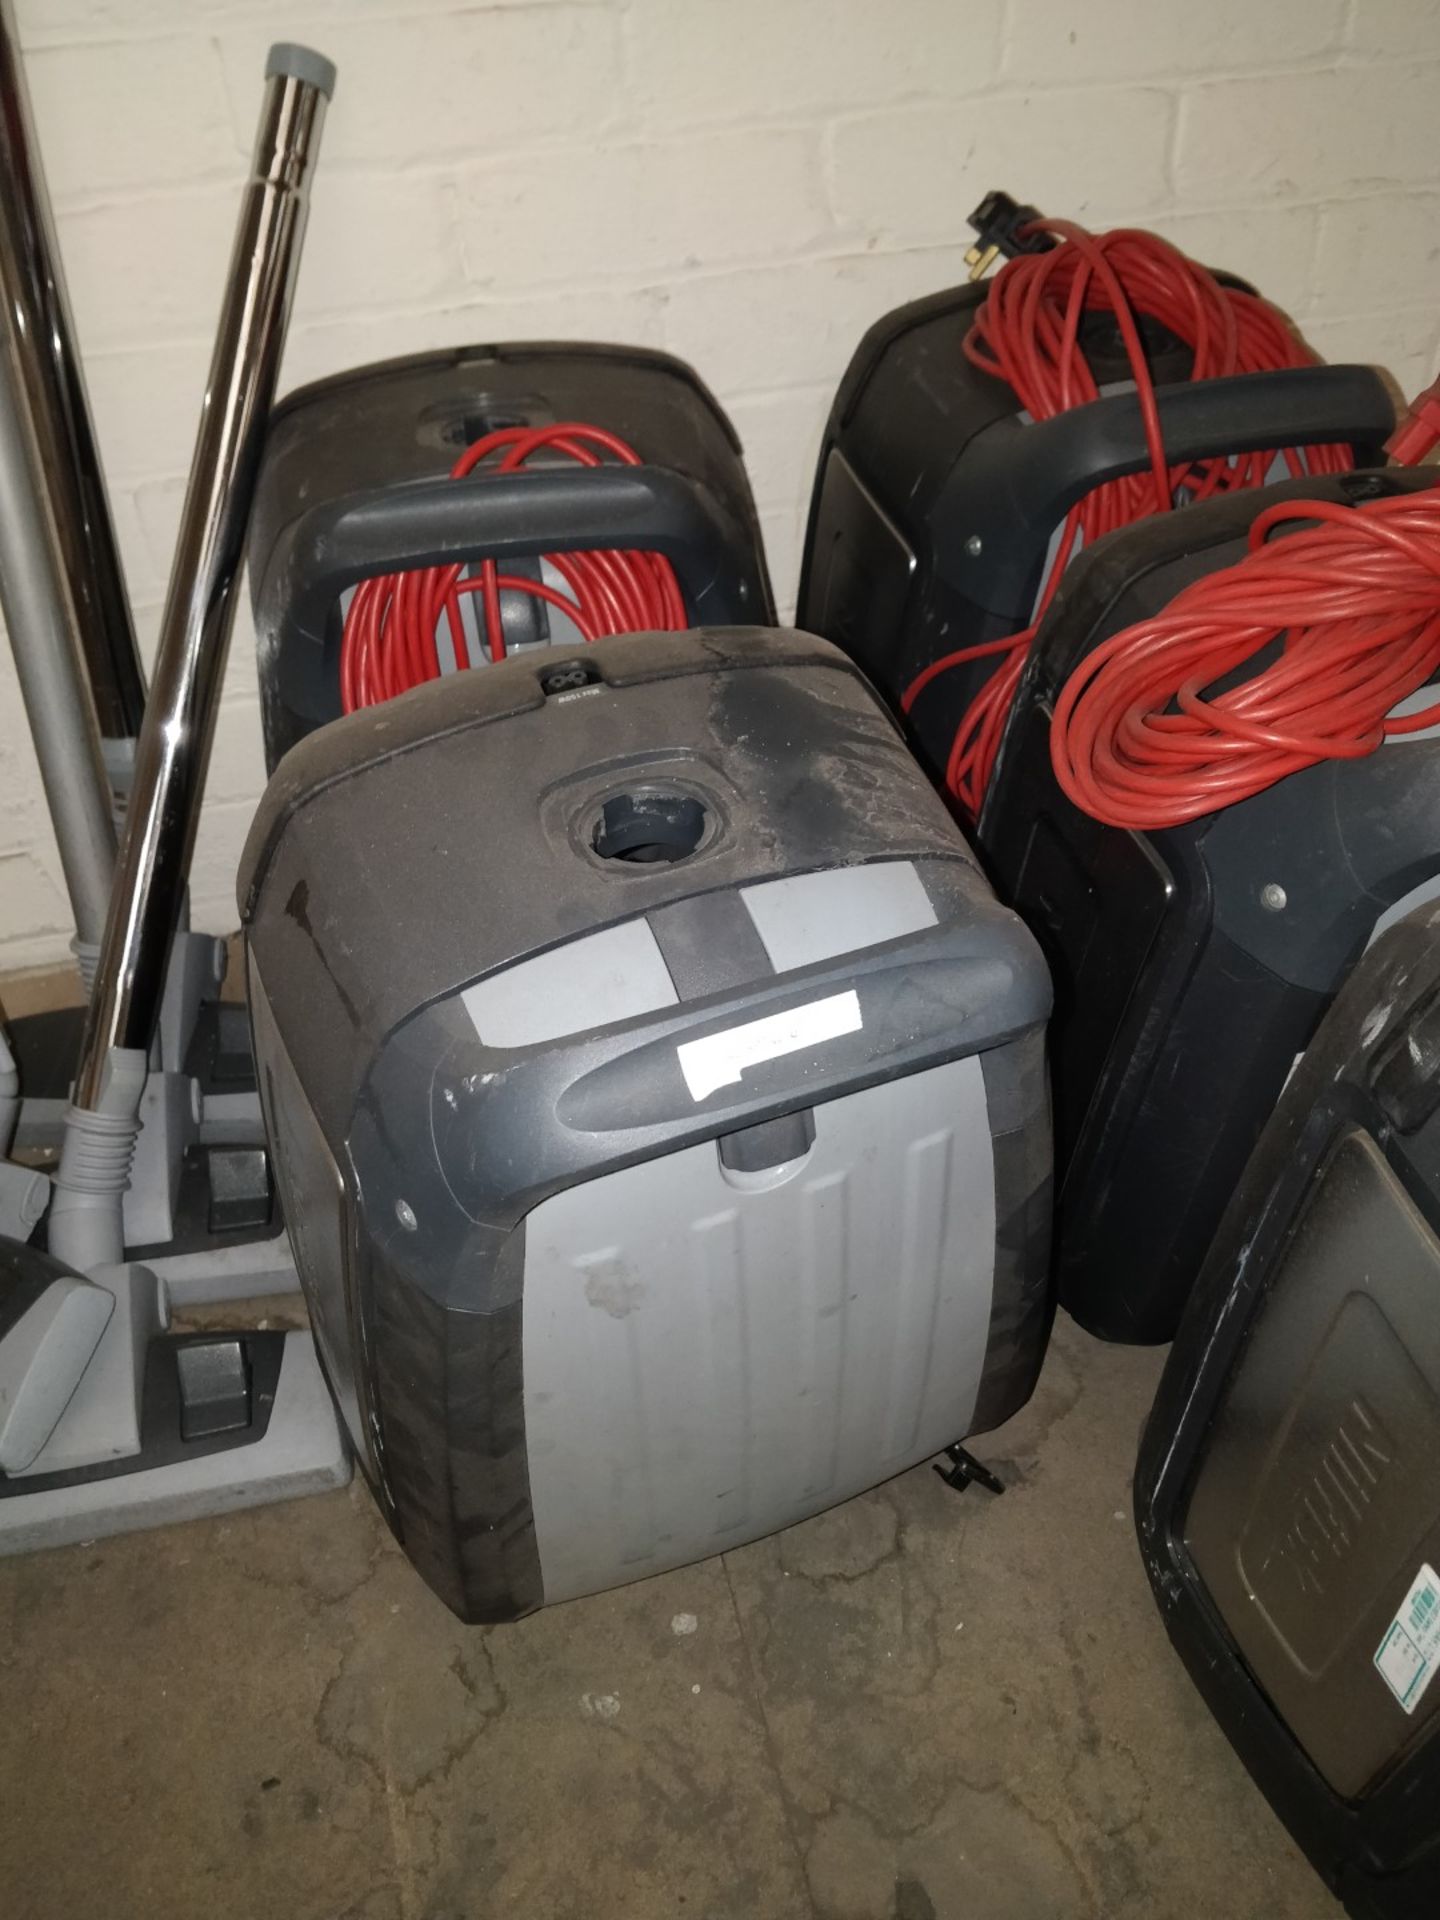 6 x NILFISK HDS2000 Commercial Vacuum Cleaners - Ref: VM402/Upstairs B2 - CL409 - Location: - Image 3 of 3